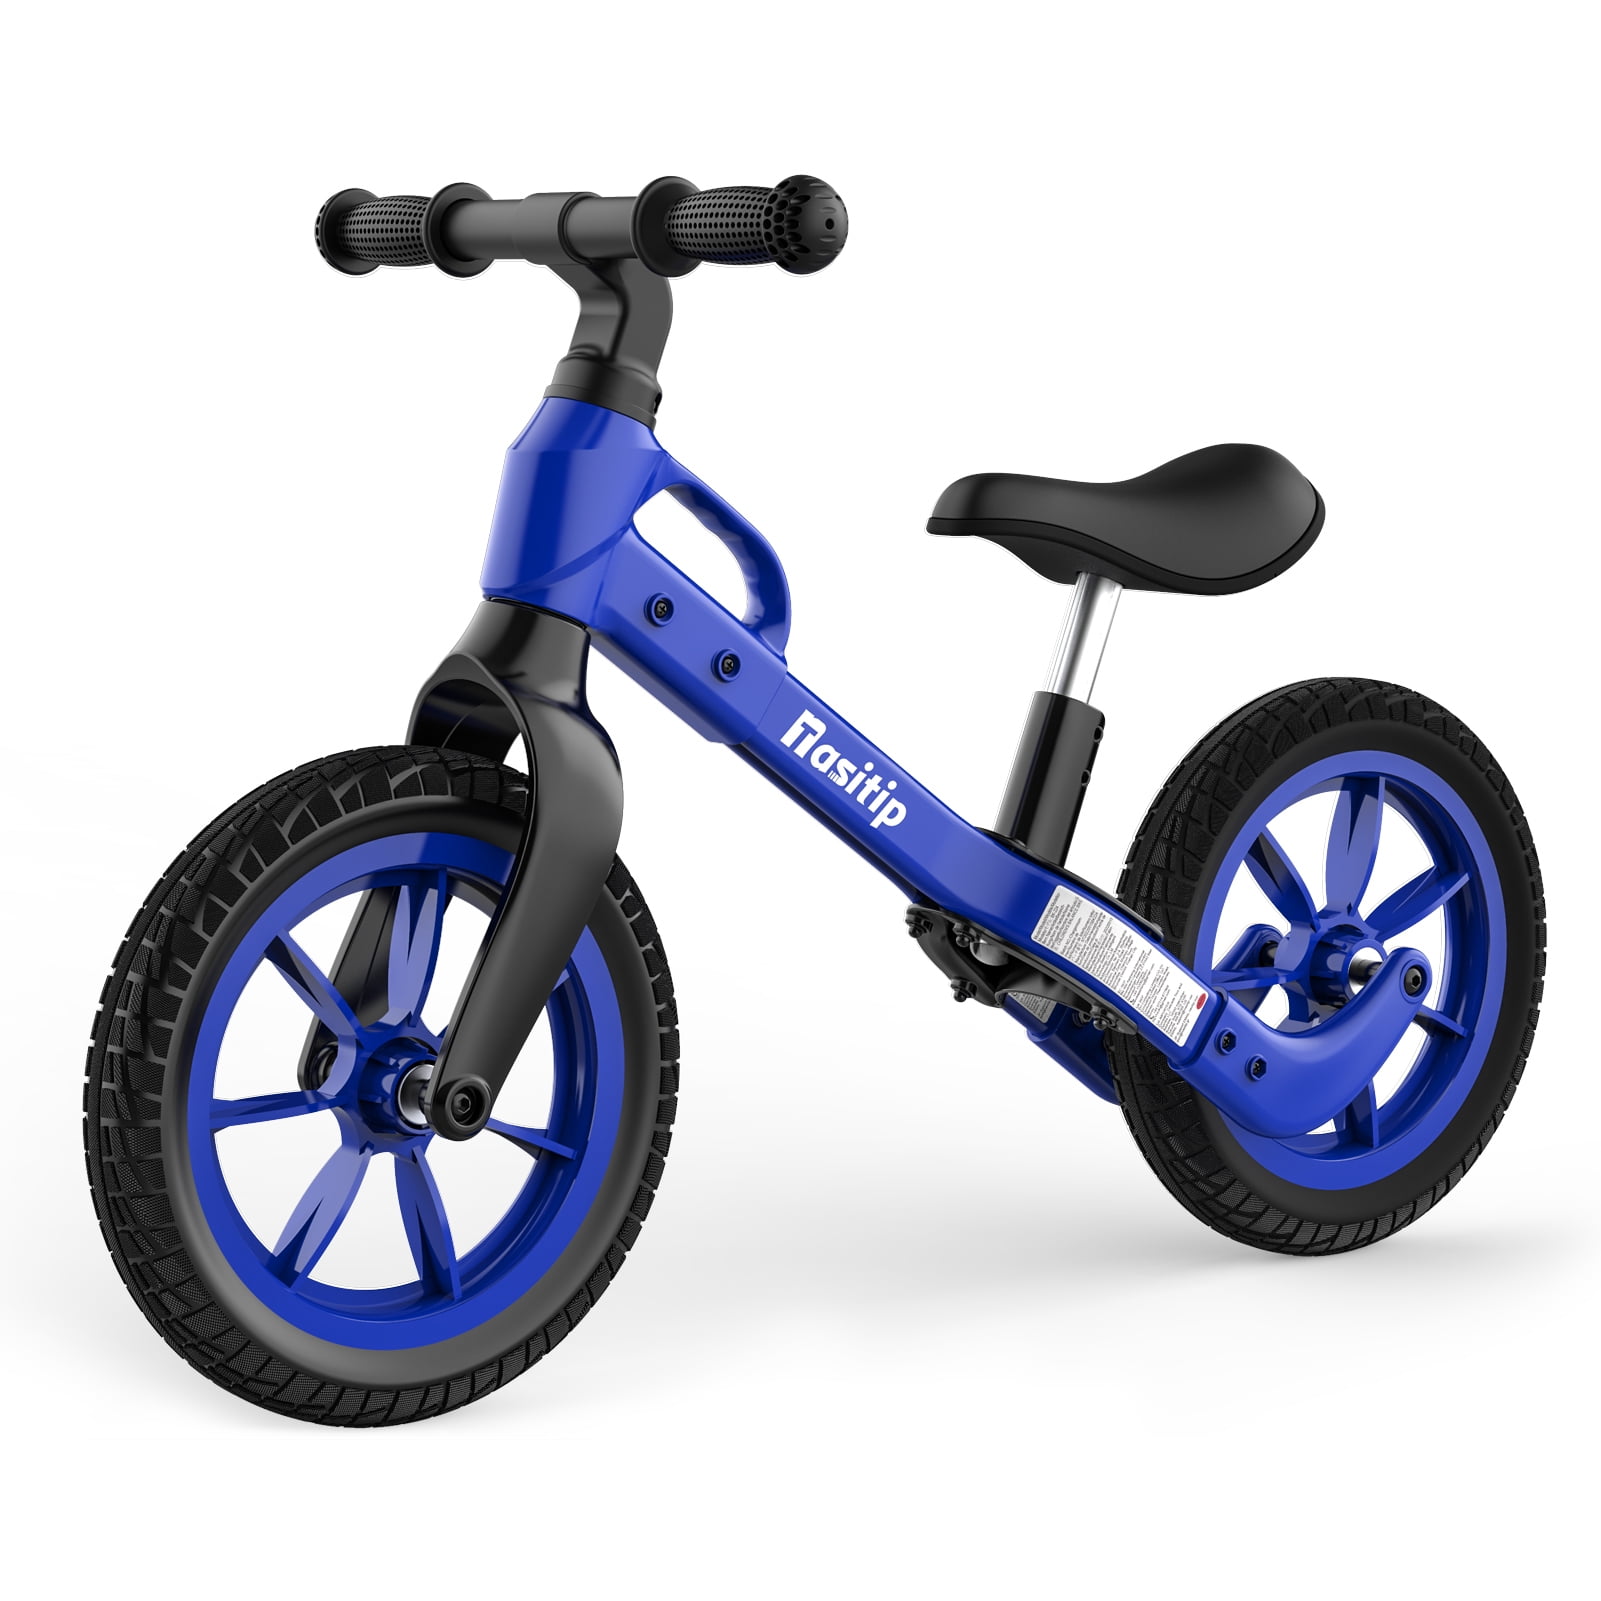 Garden Toy with Air Filled Tyres,Blue Kids No Pedal Walking Bike Boy Girl Training Bicycle SHARESUN 12 Inch Wheels Balance Bike for 2-6 Year Old 